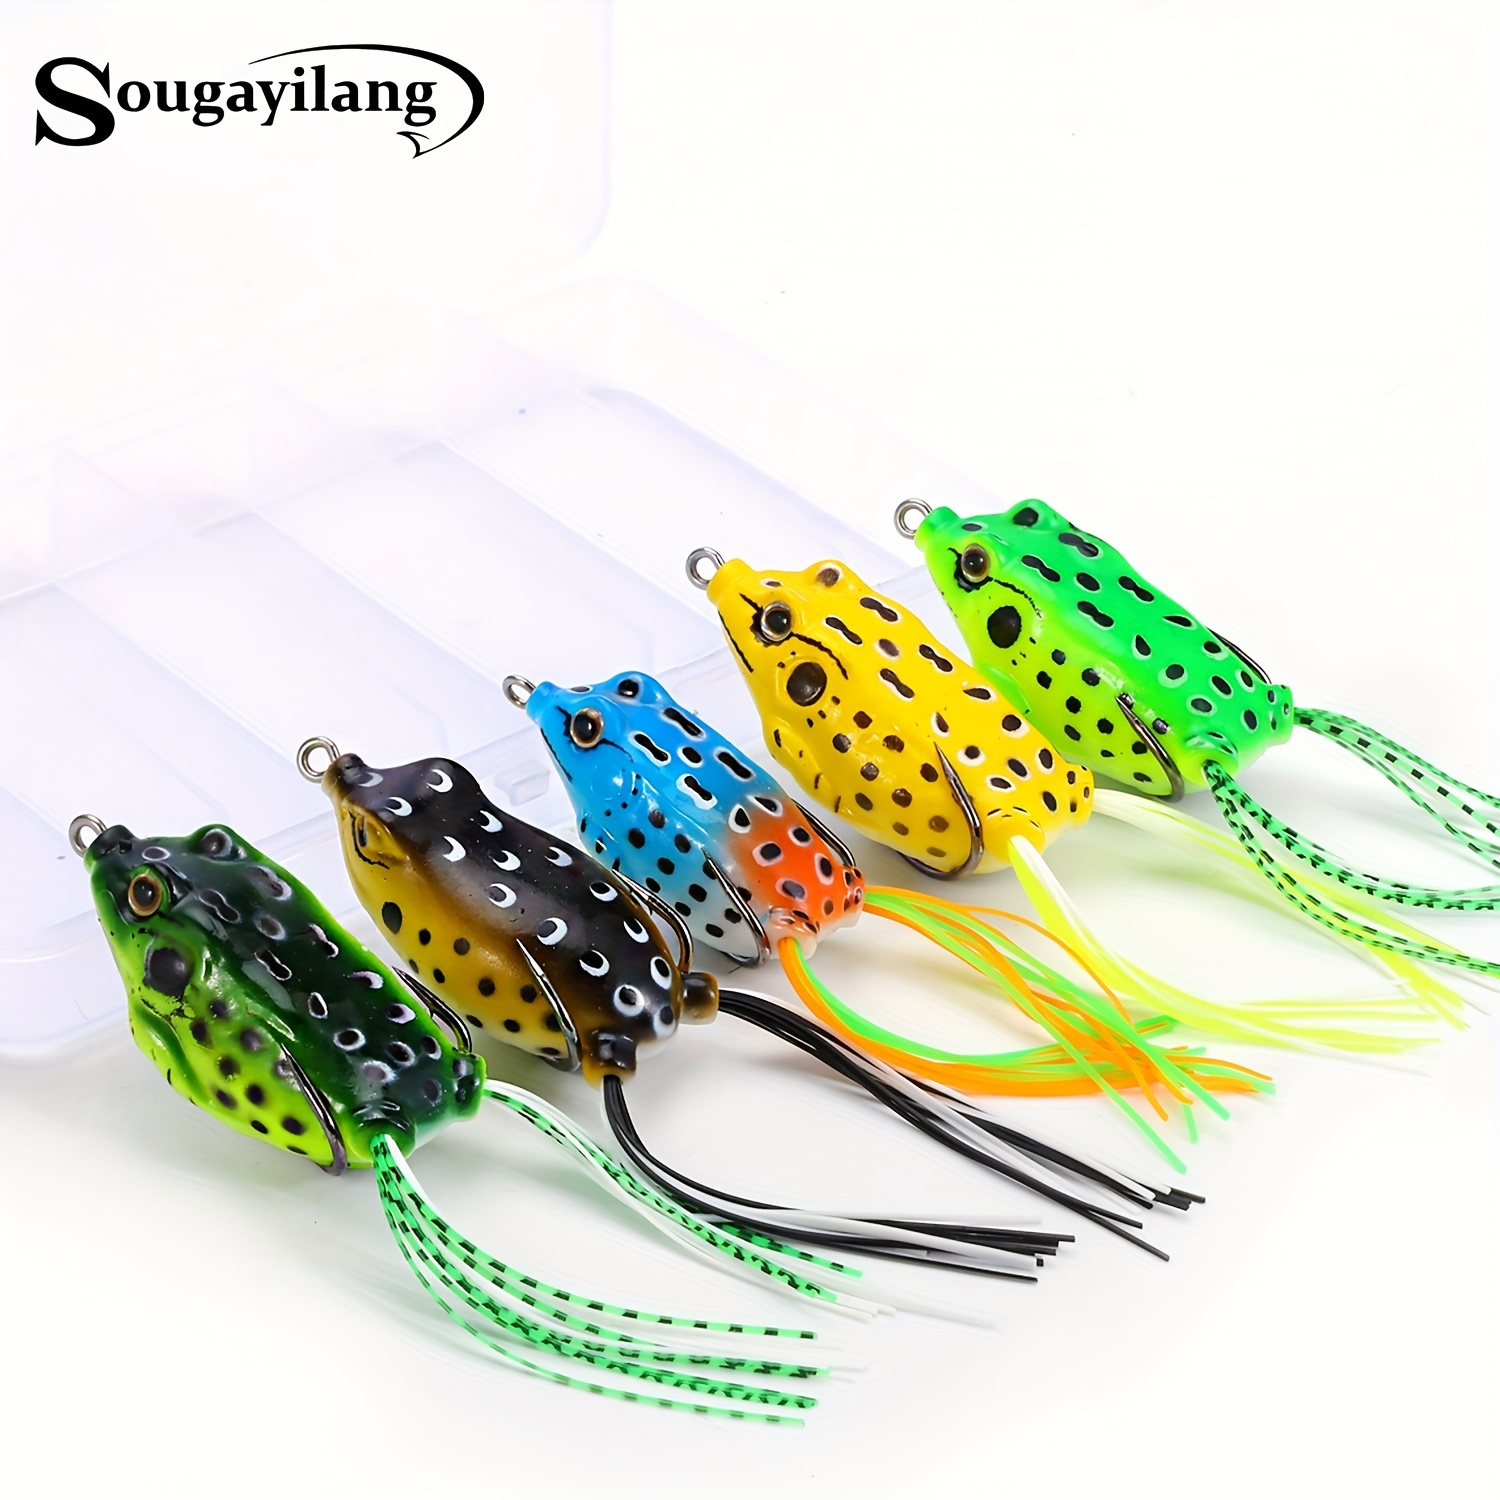 Sougayilang 9Pcs Frog Fishing Lures Soft Topwater Baits Double Hooks Top  Water Frog Artificial Soft Bait Winter Fishing Tackle